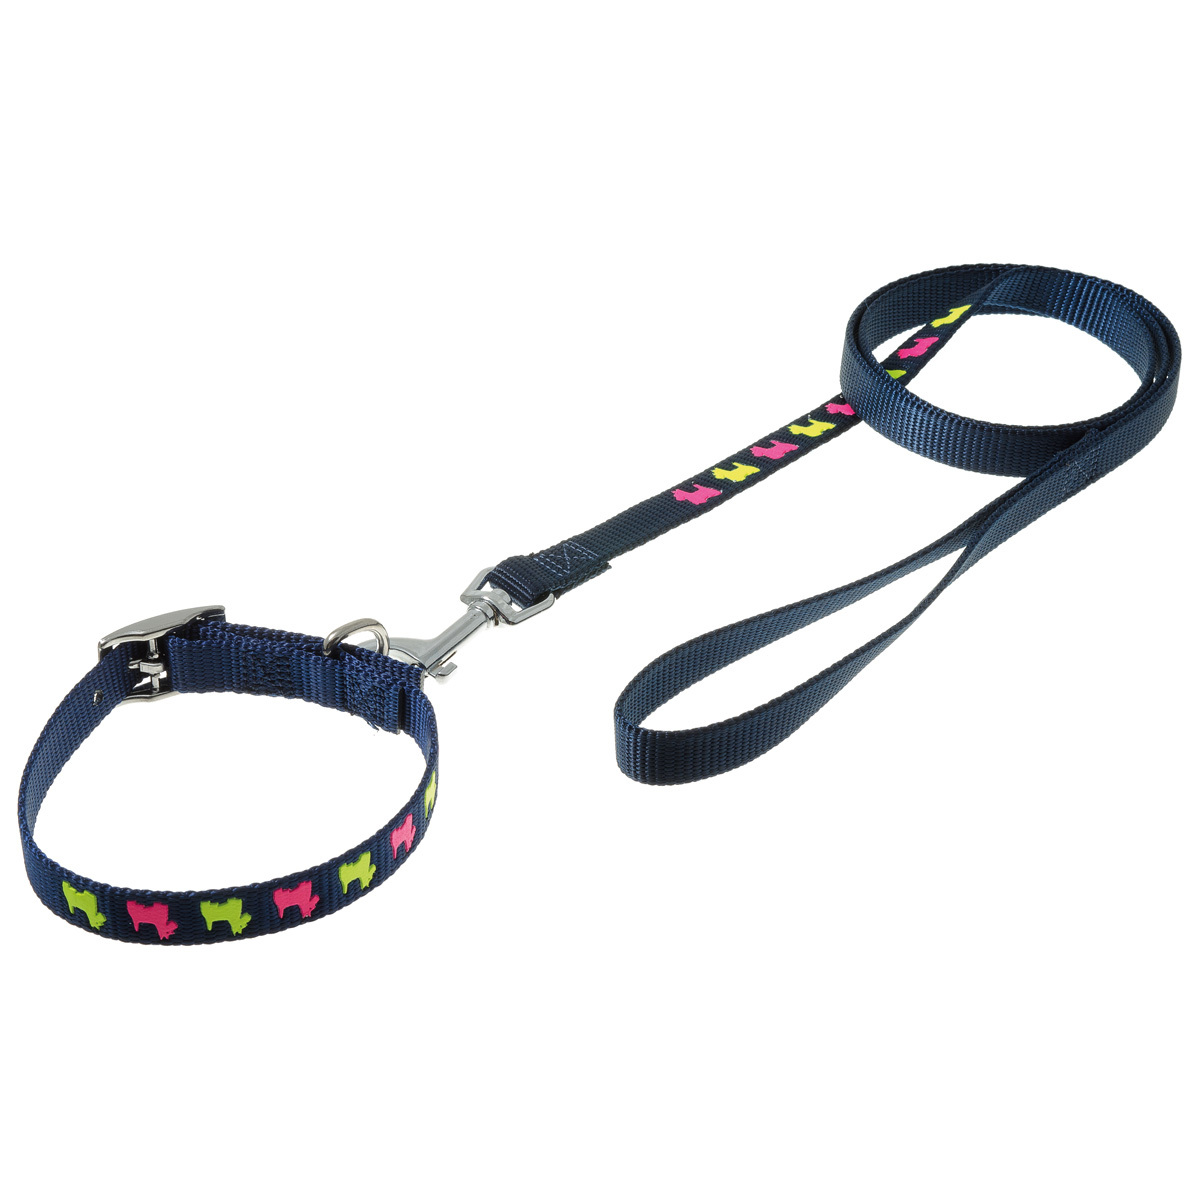 Collars and dogs for dogs on Aliexpress